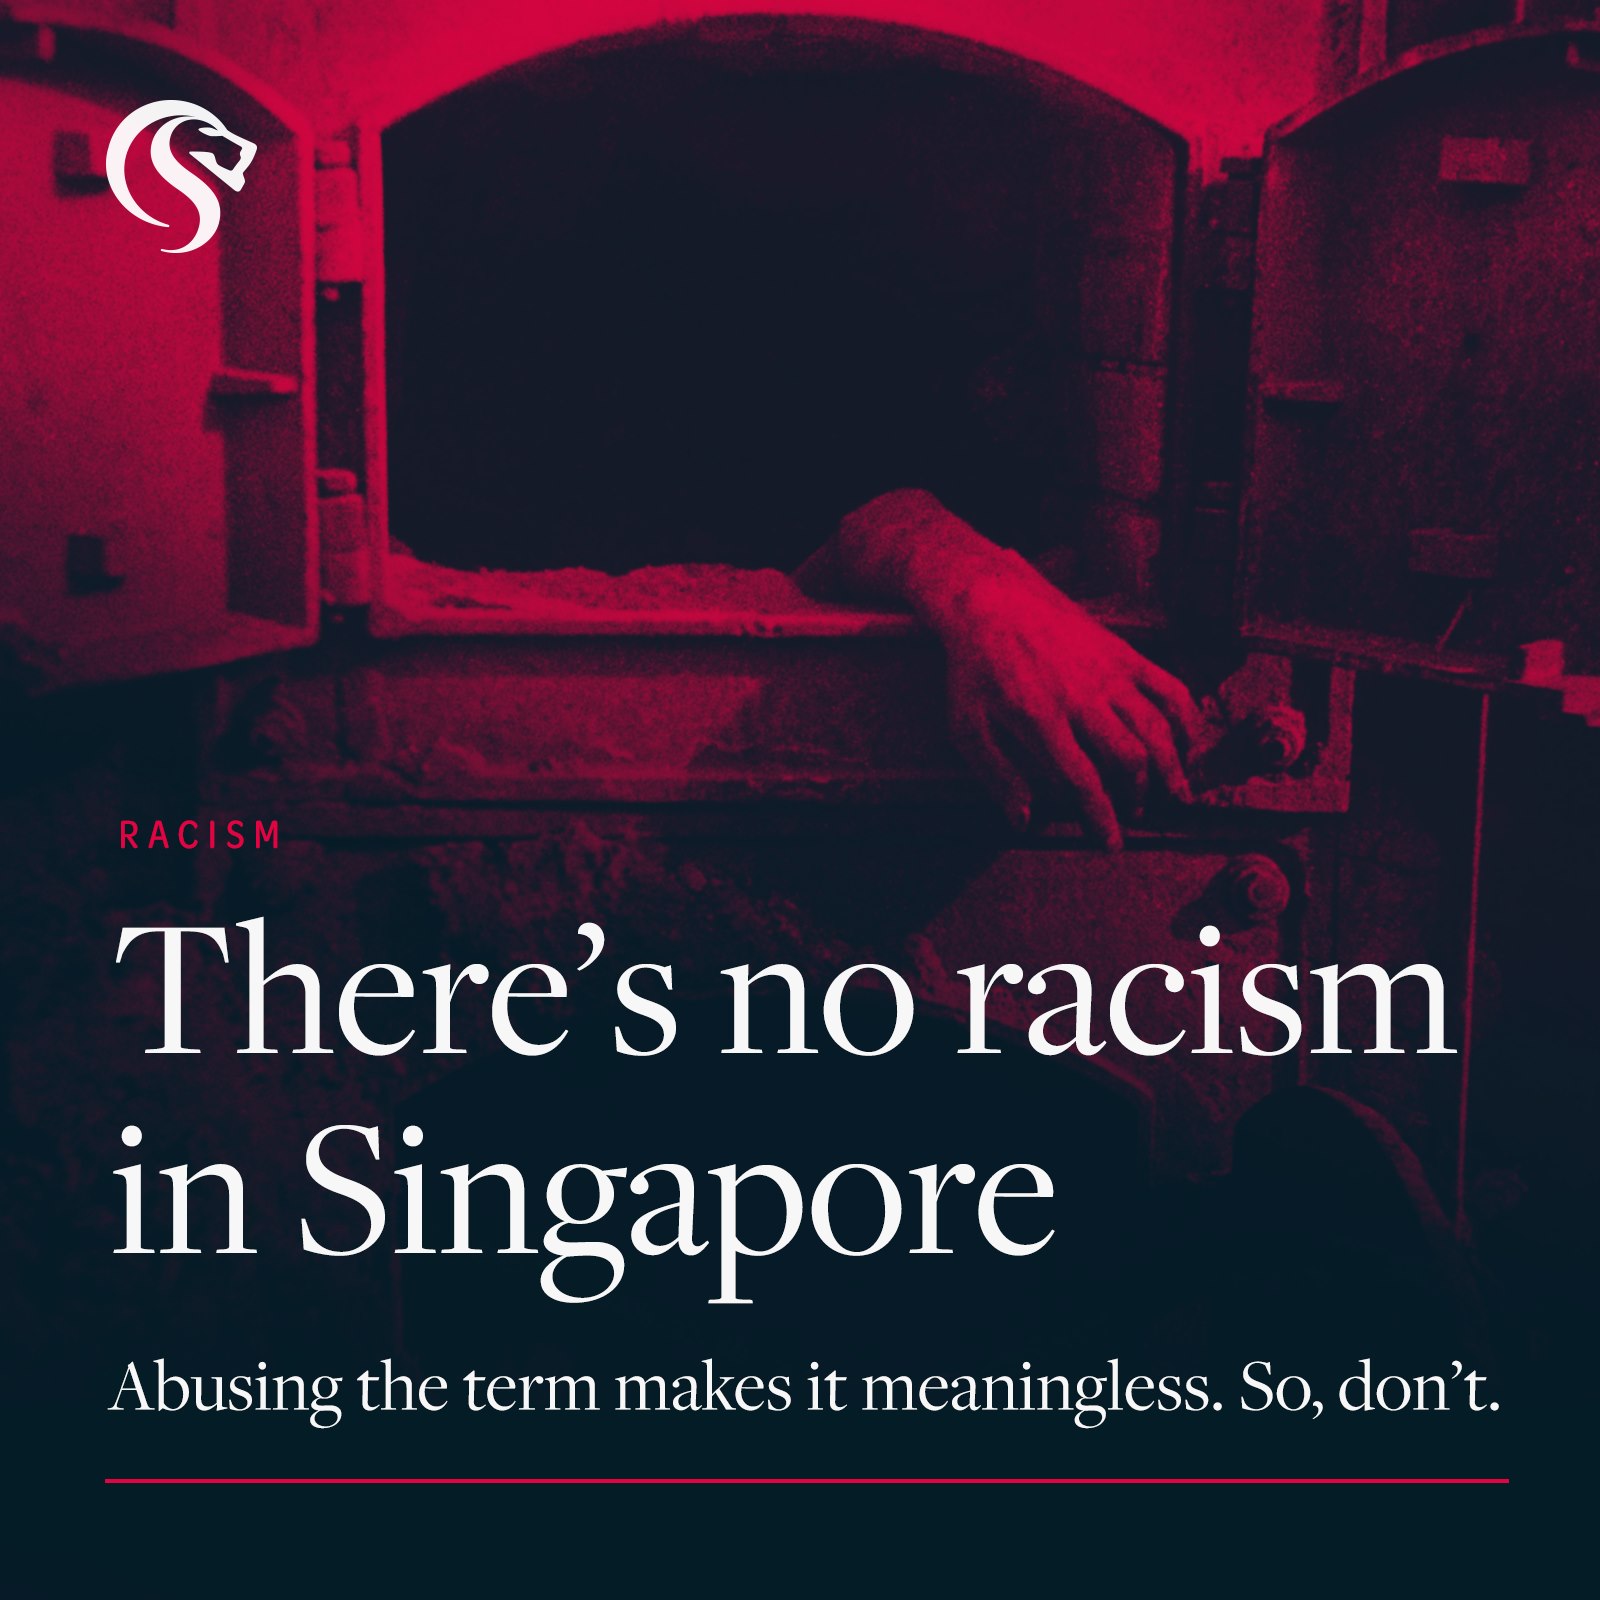 Critical Spectator says he doesn’t think racism exists in Singapore